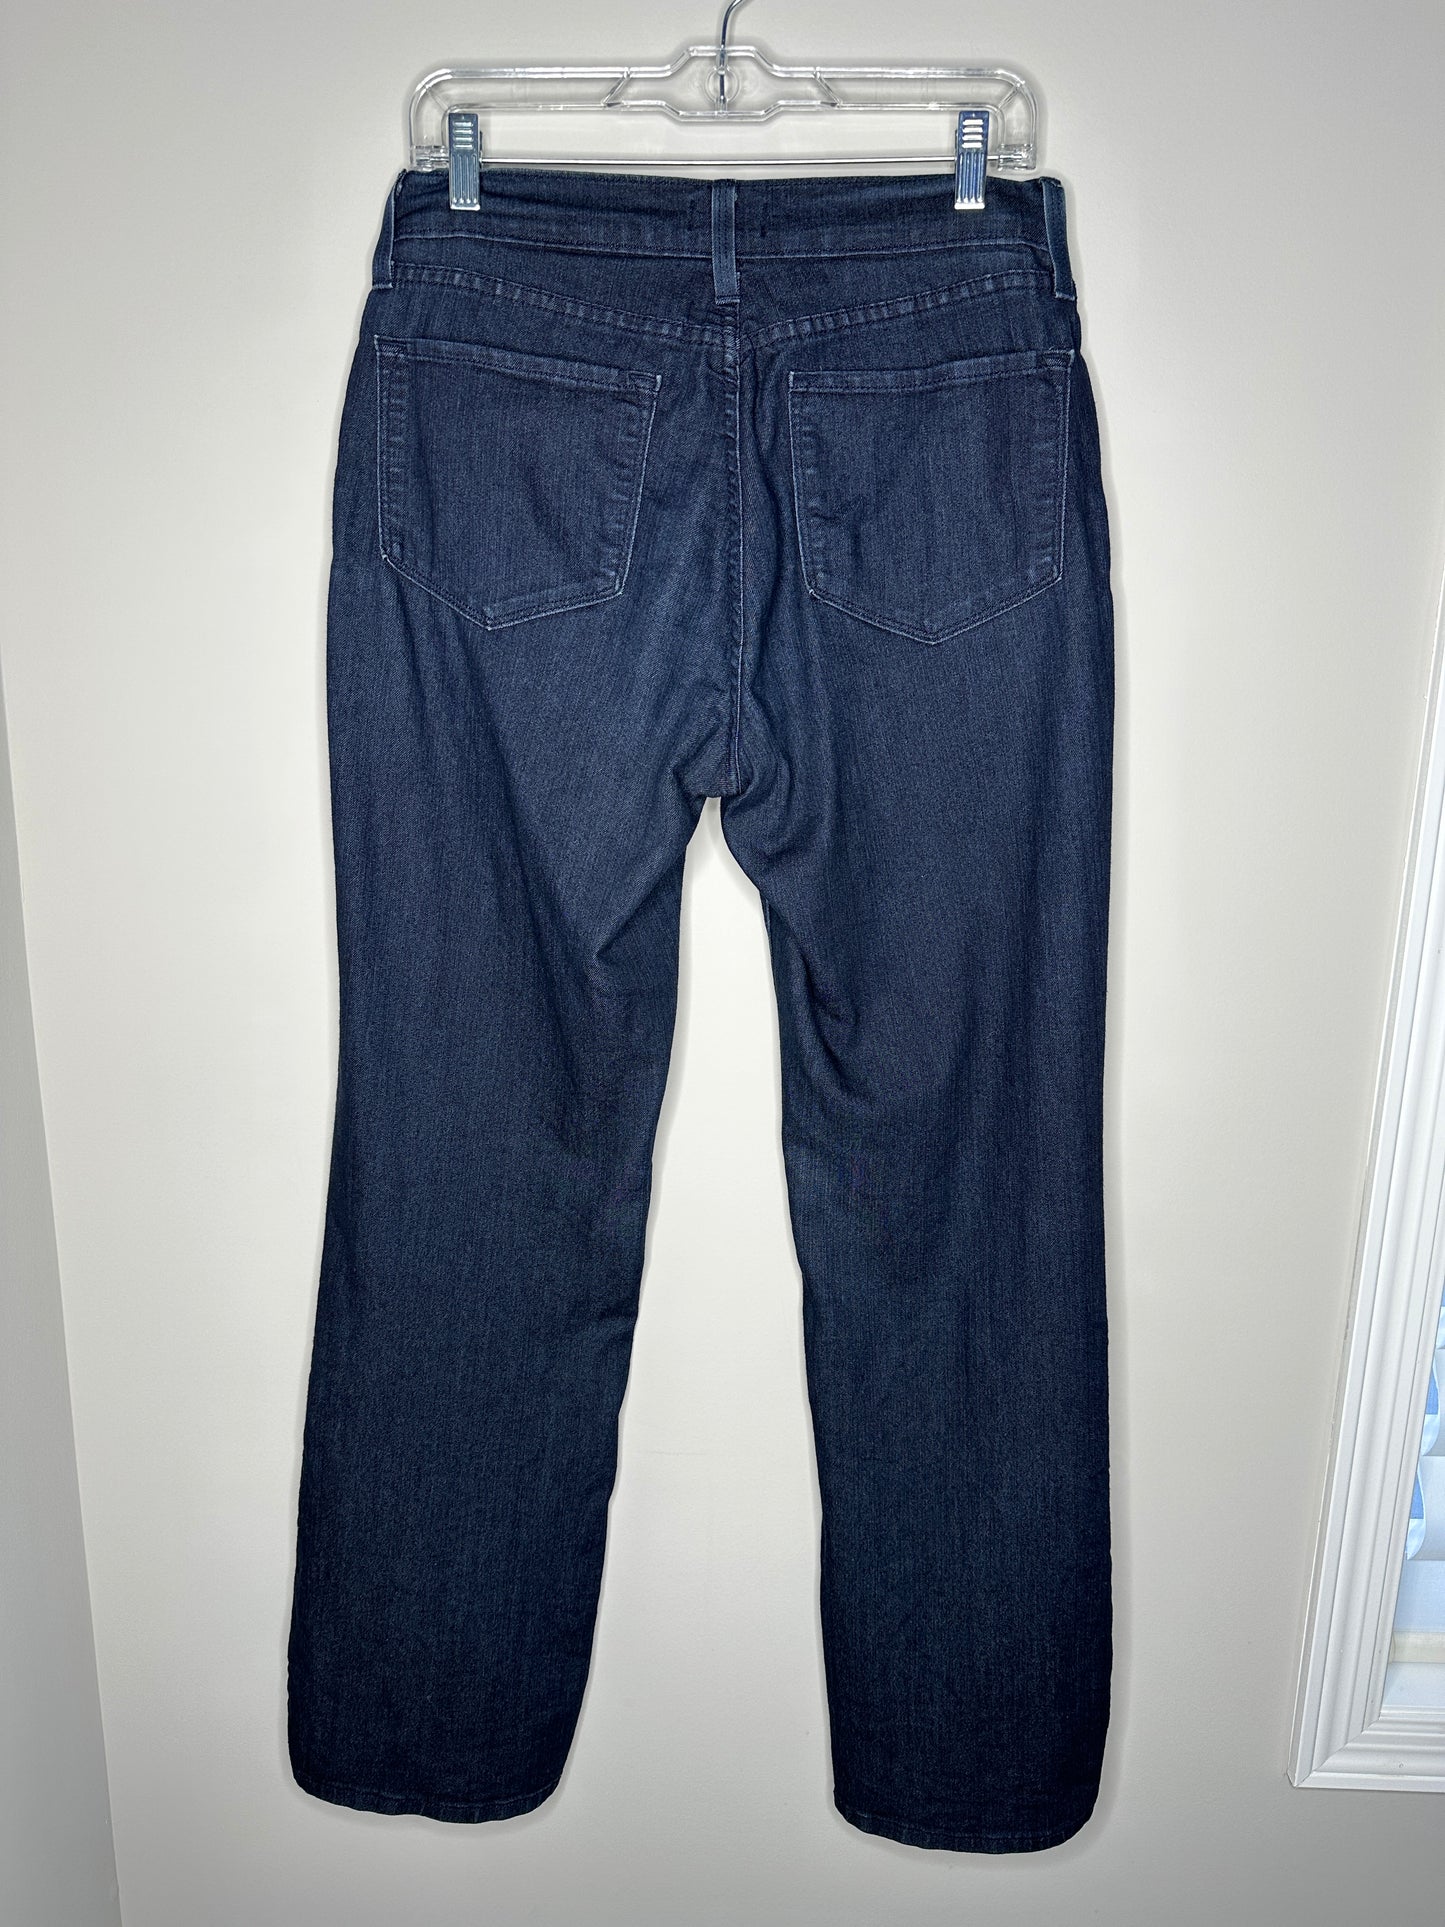 NYDJ Not Your Daughter's Jeans Size 8 Blue Dark Wash Bootcut Jeans